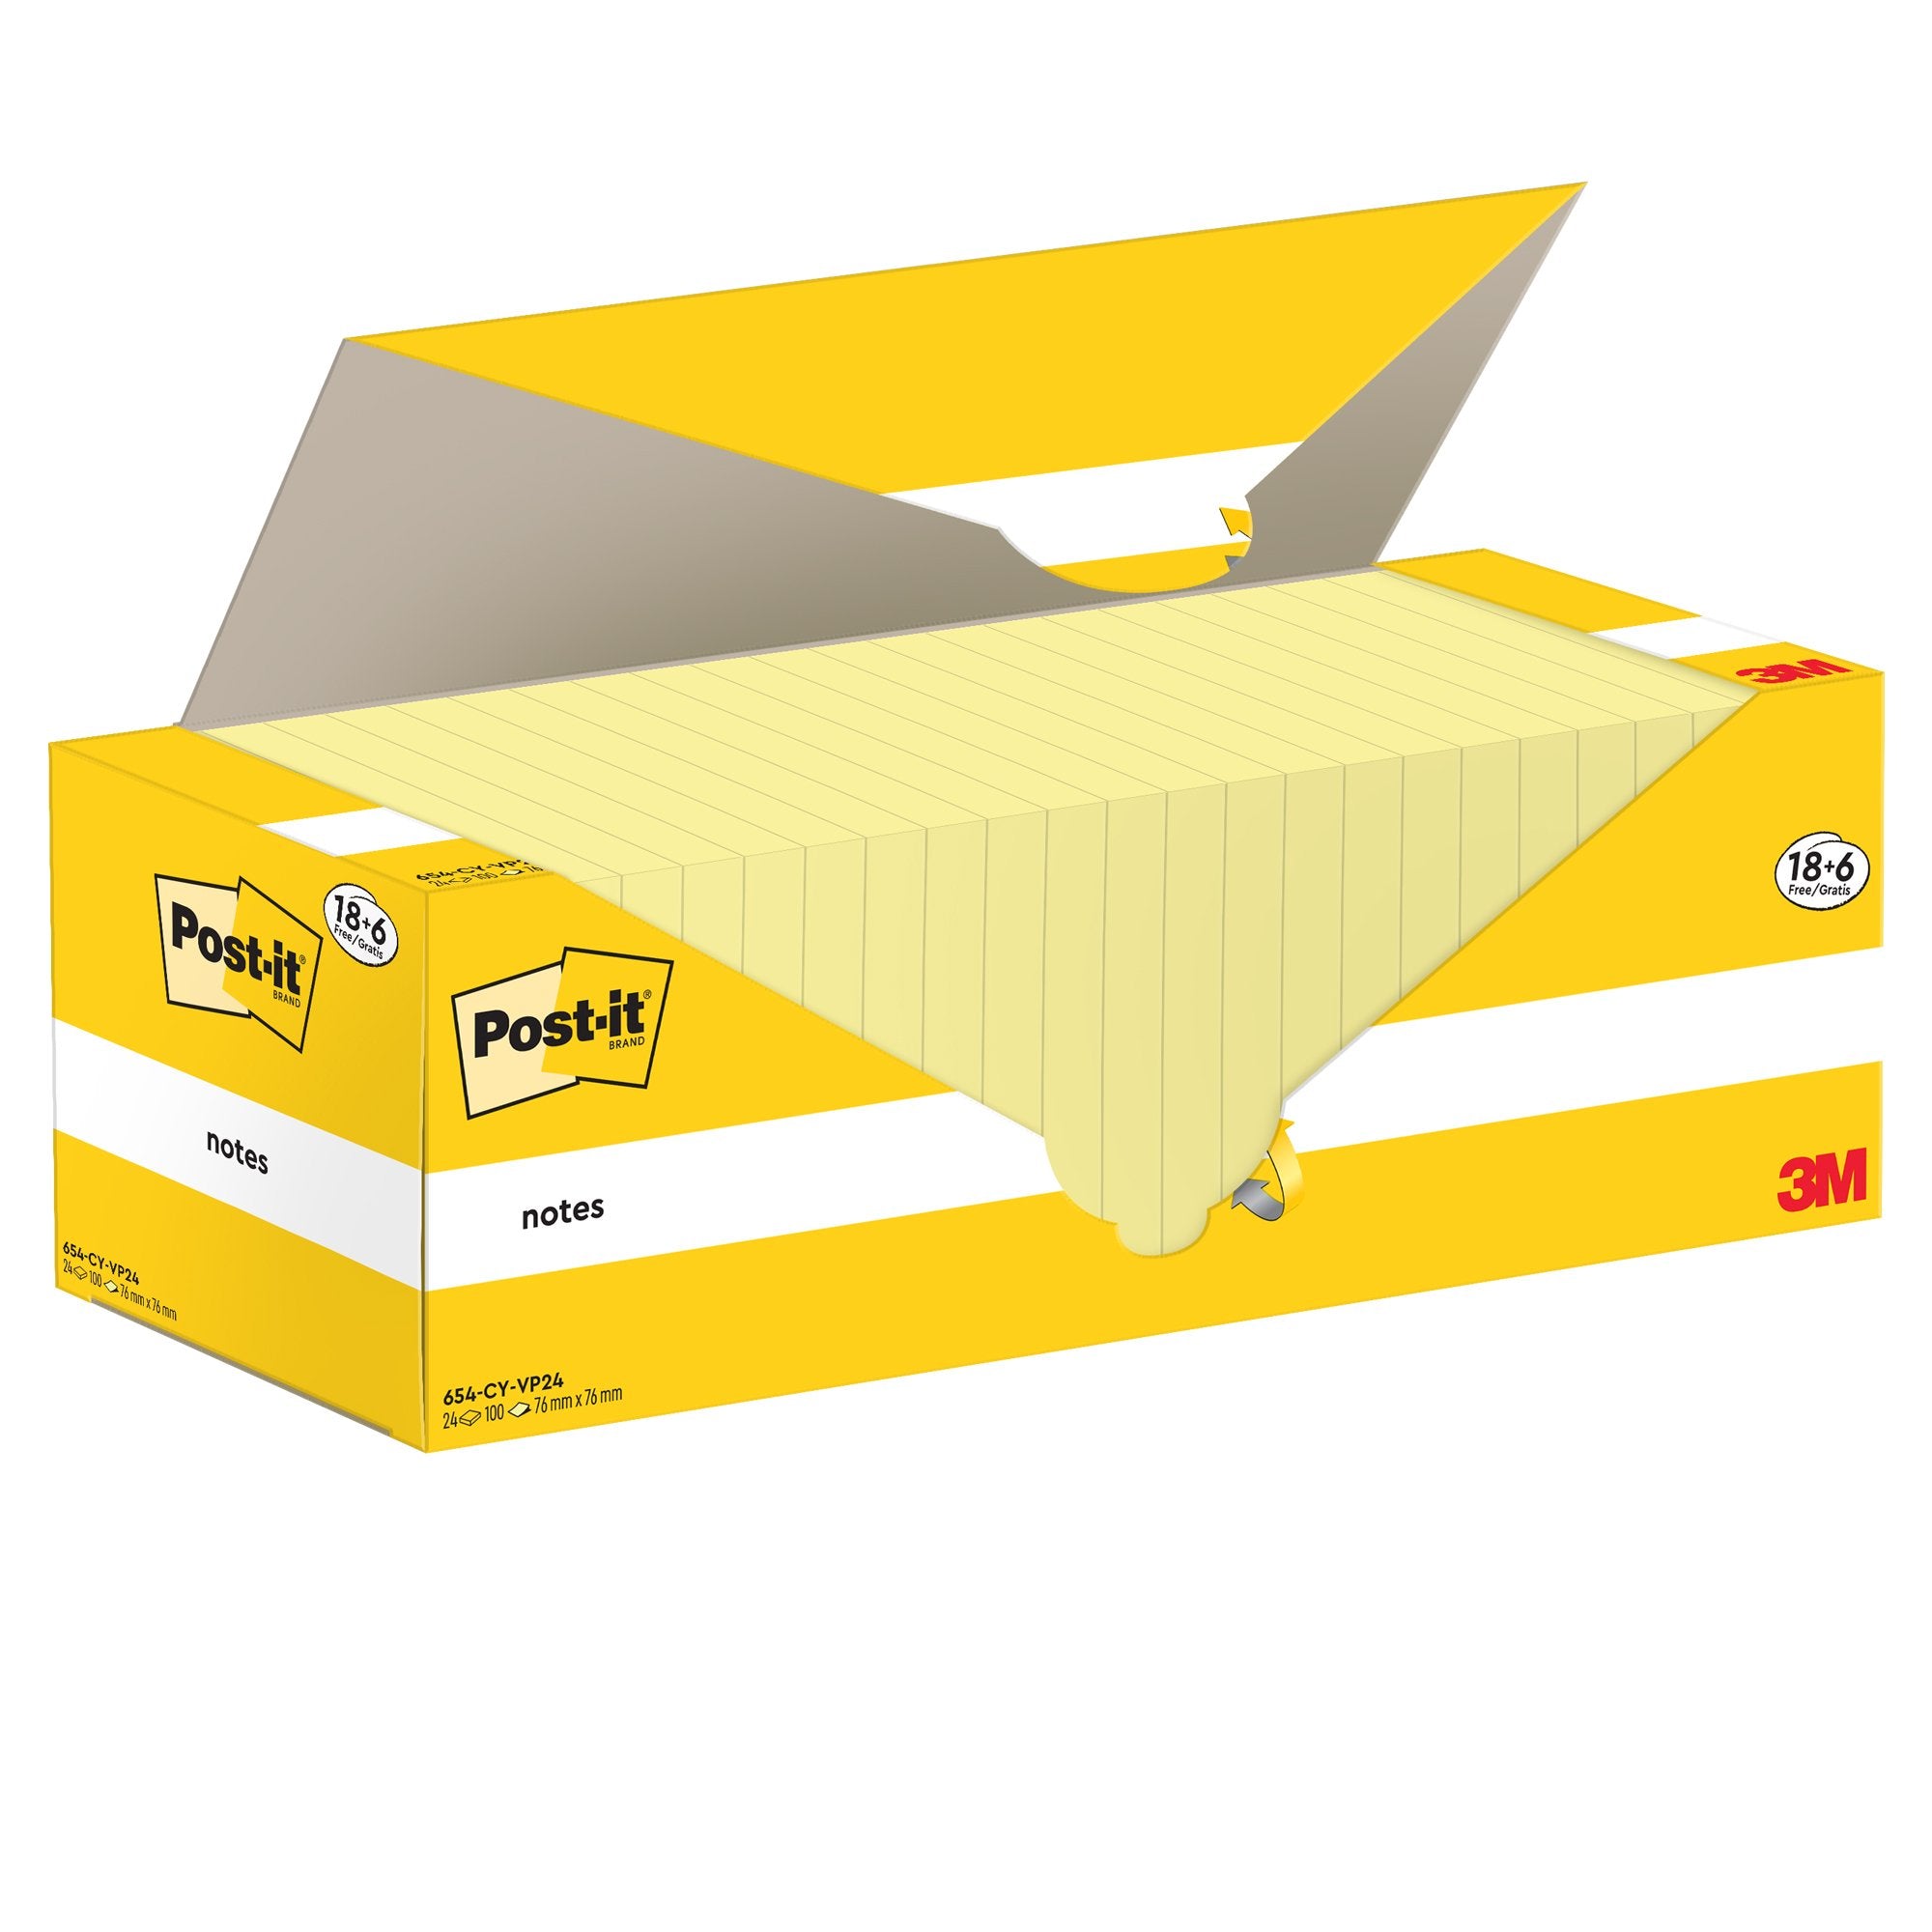 post-it-cf-186pz-blocco-100fg-notes-76x76mm-654-cy-vp24-giallo-canary